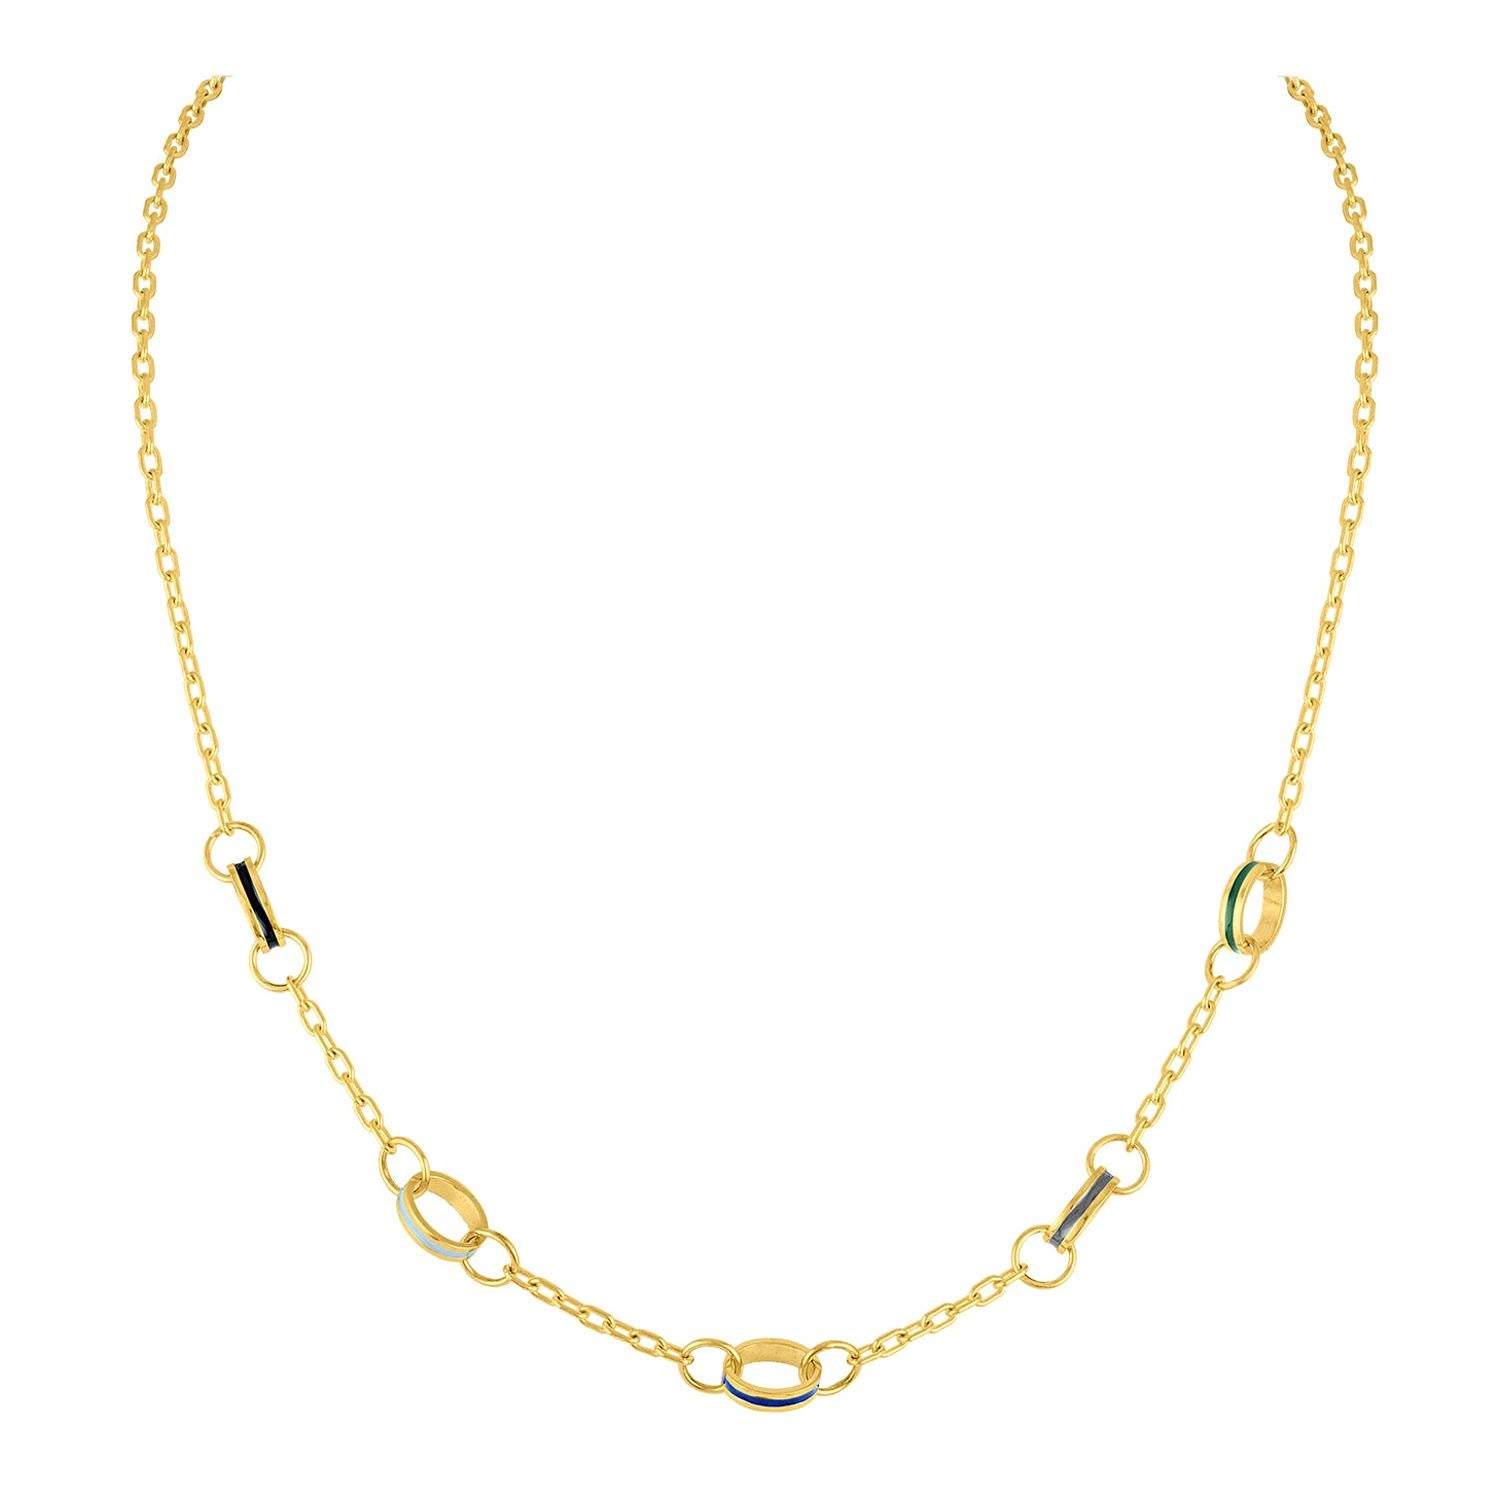 14 Karat Gold Chain with Colored Enamel Links For Sale